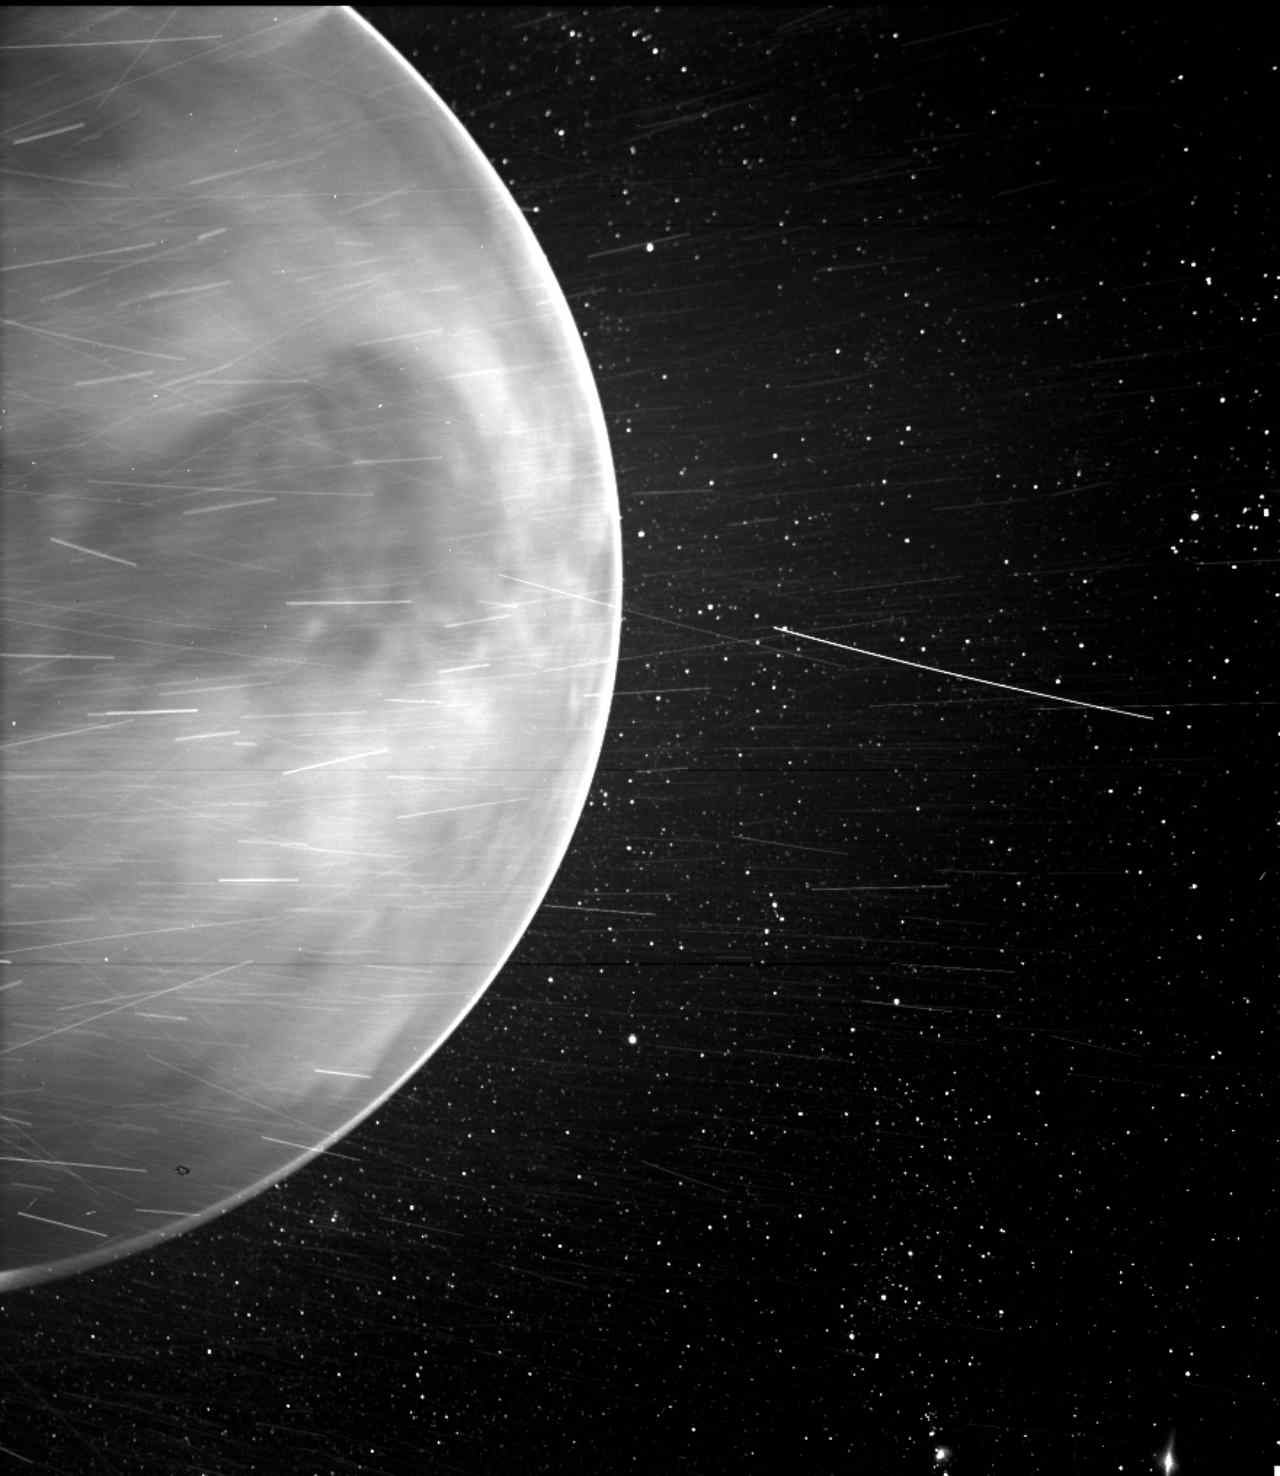 When flying past Venus in July 2020, Parker Solar Probe’s WISPR camera, detected a bright rim around the edge of the planet that may be nightglow. Bright streaks like the ones seen here are typically caused by a combination of charged particles (cosmic rays), sunlight reflected by space dust, and particles of material expelled from the spacecraft’s structures after impact with those dust grains. Image: NASA